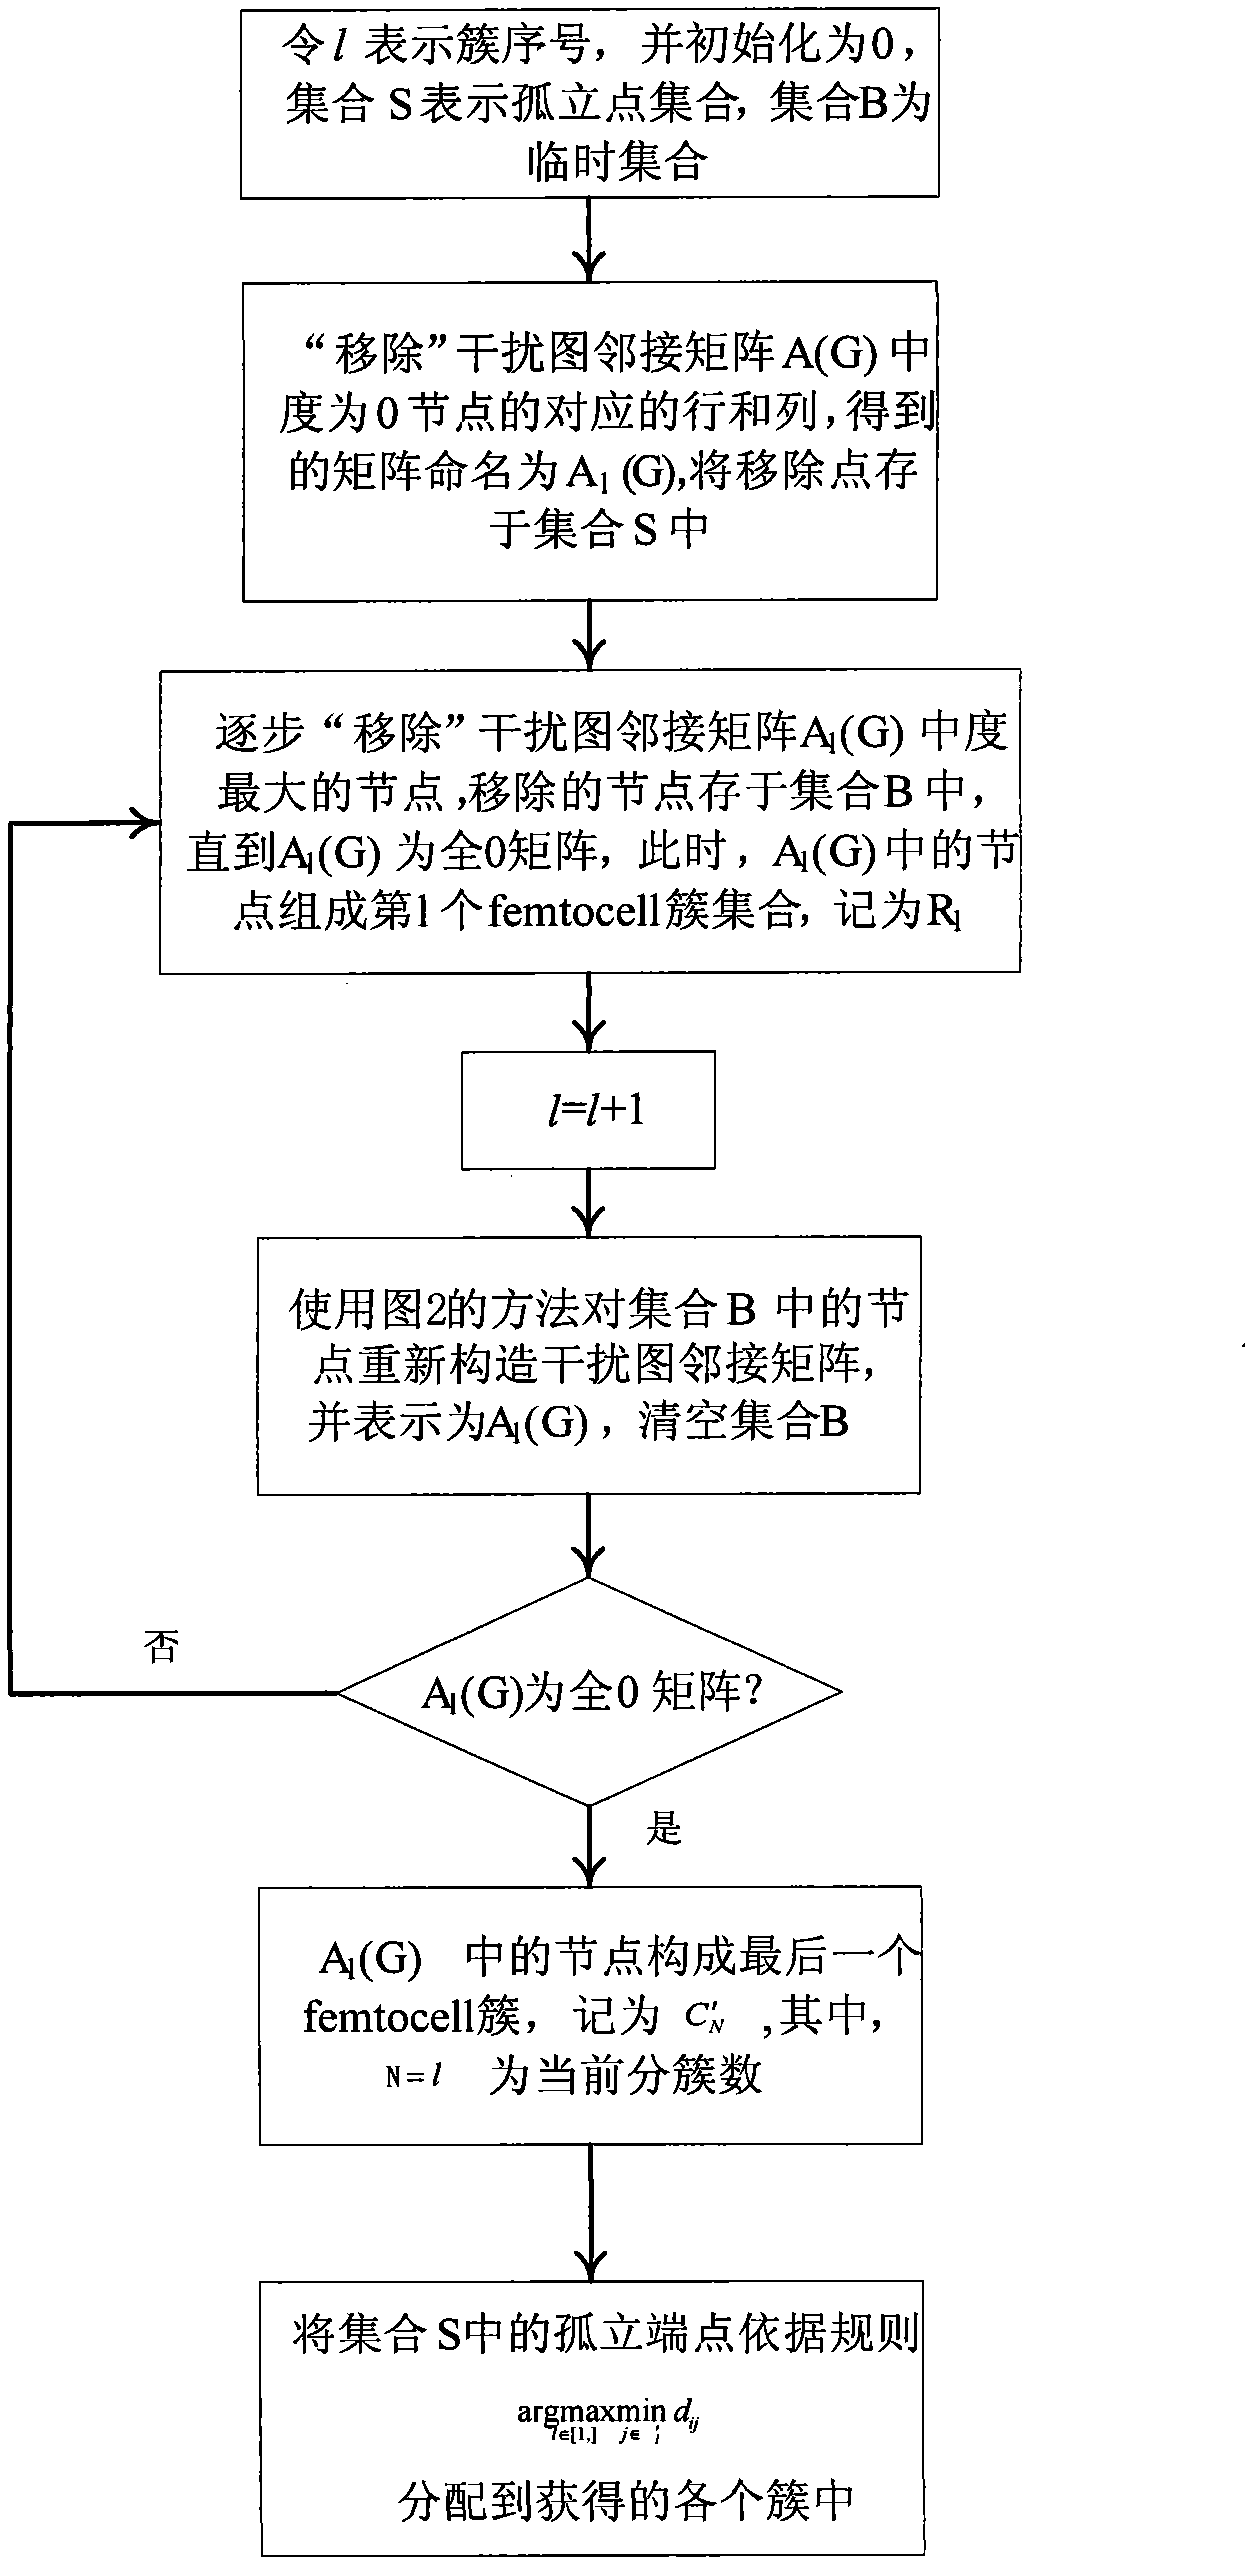 Interference suppression method of hybrid network of macrocell and Femtocell